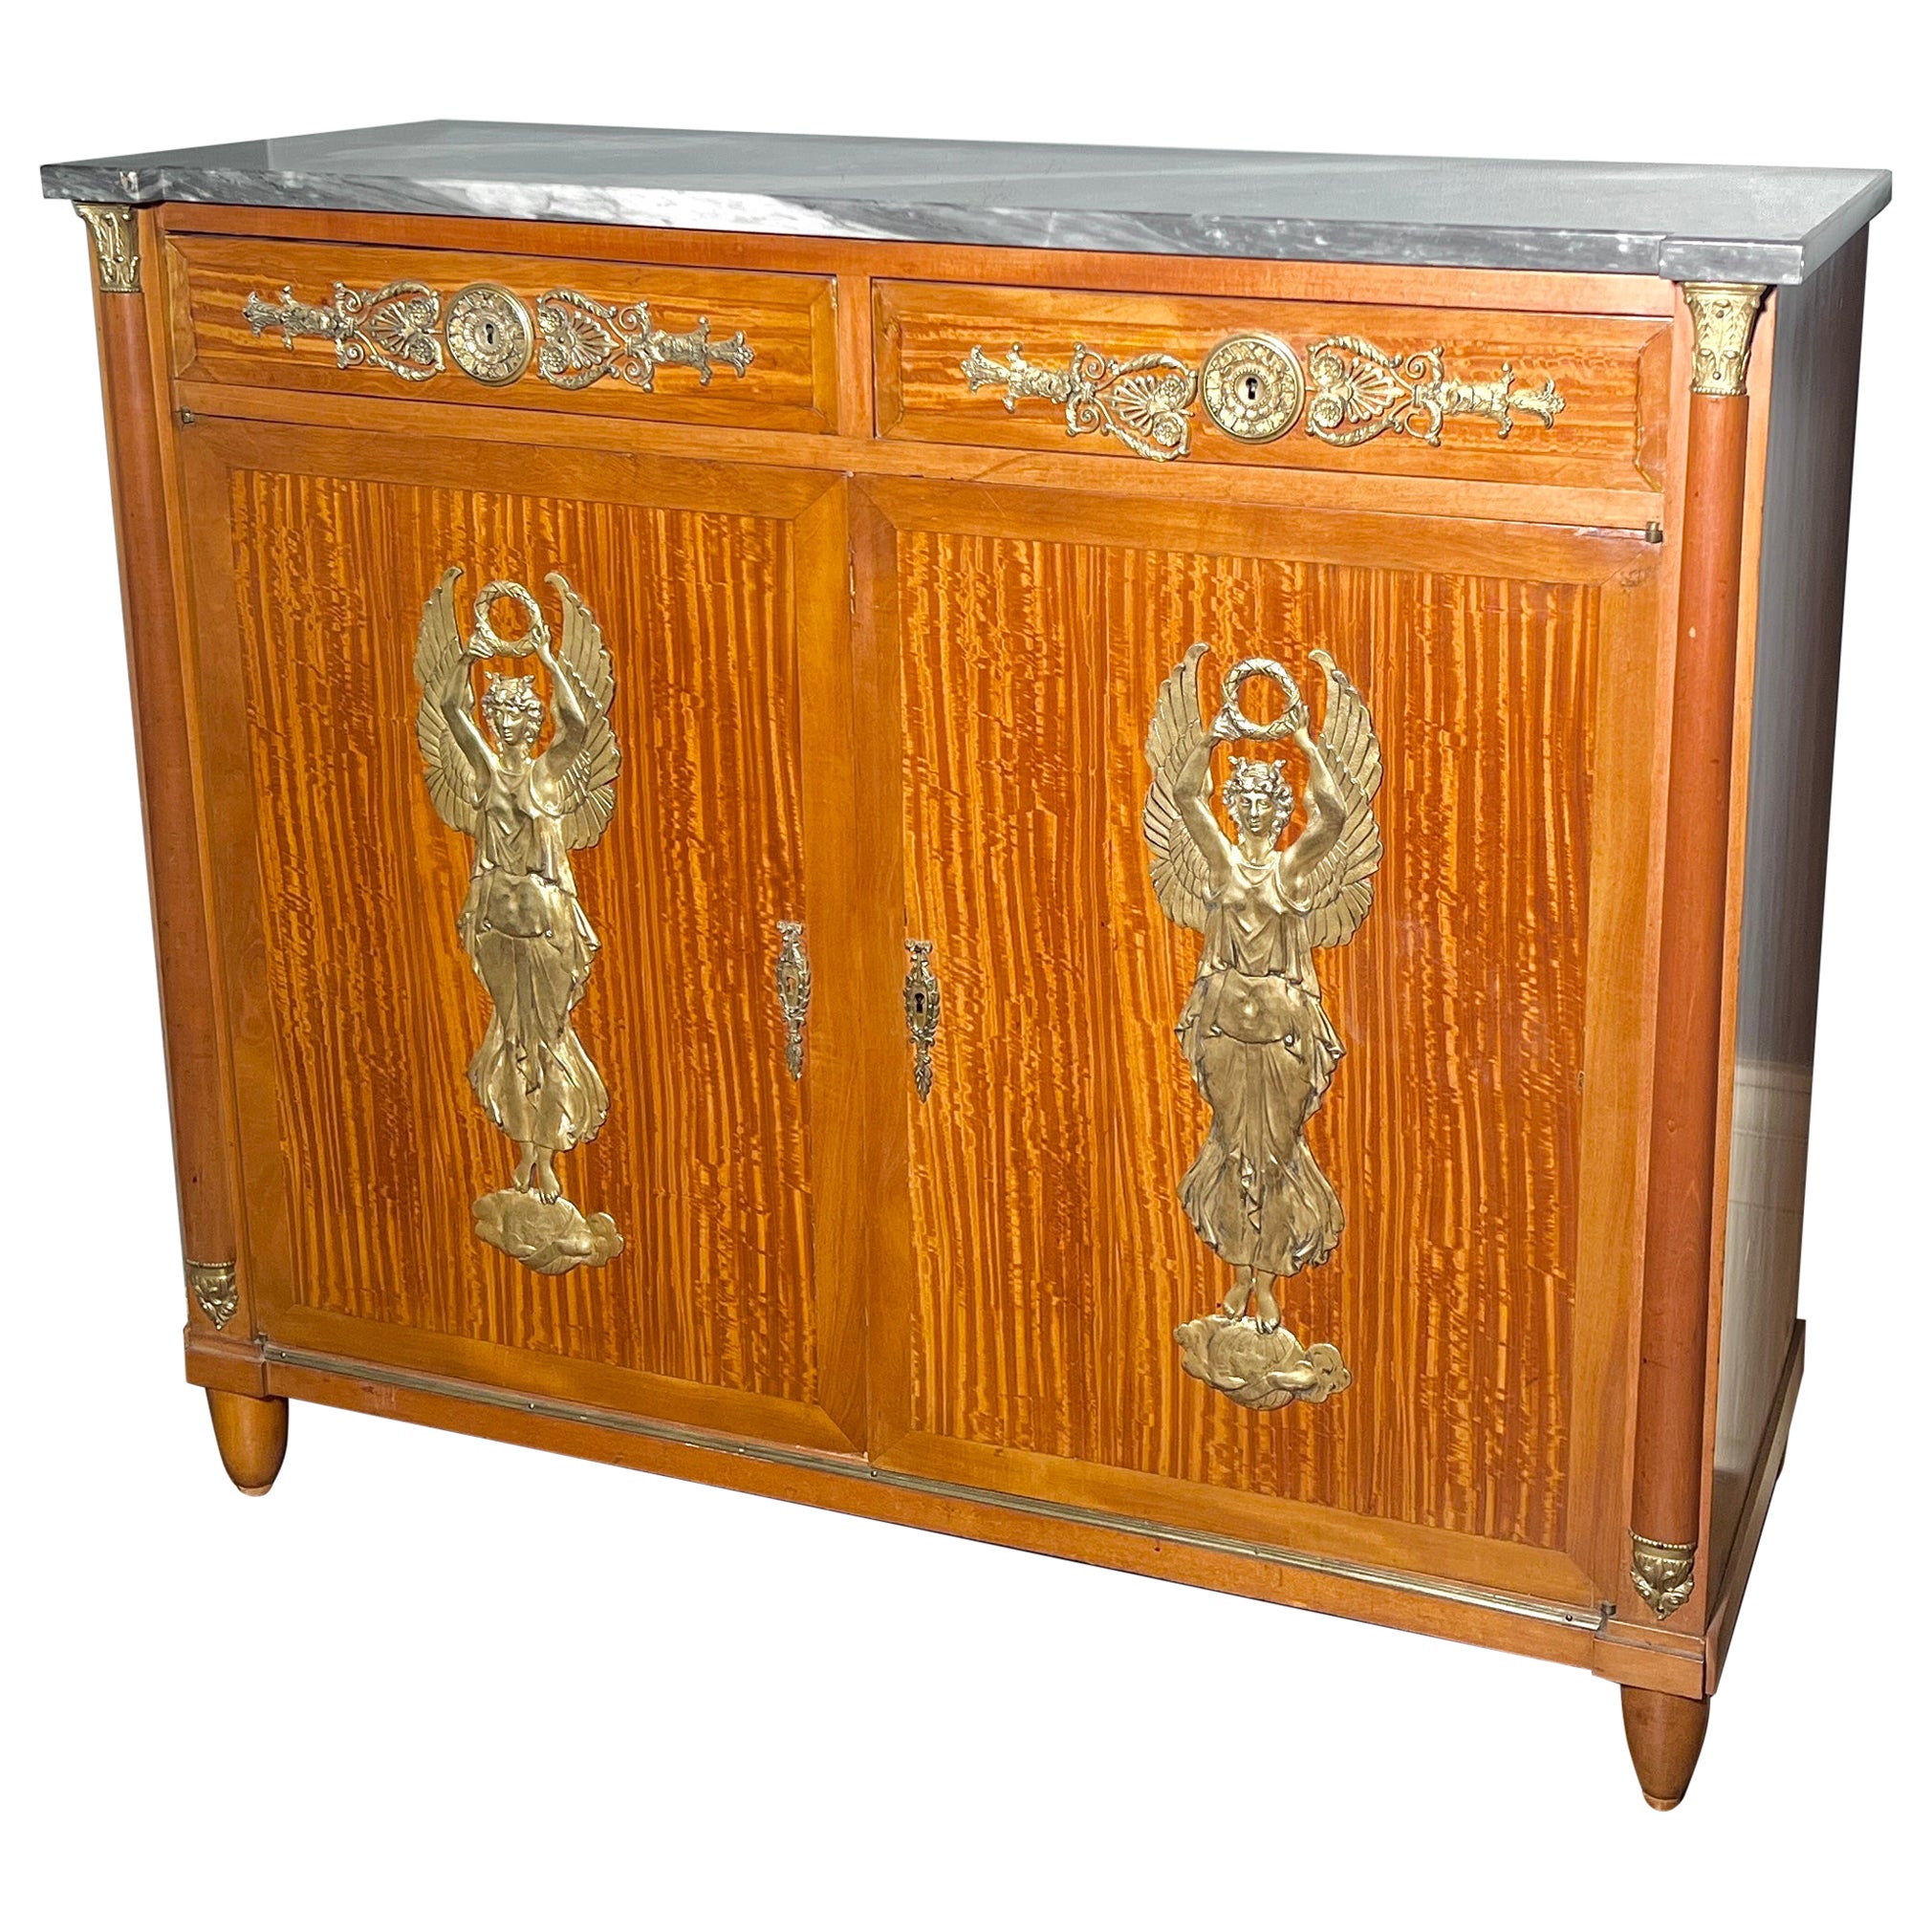 Antique French Empire Ormolu Mounted Marble Top Satinwood Cabinet, Circa 1890. For Sale